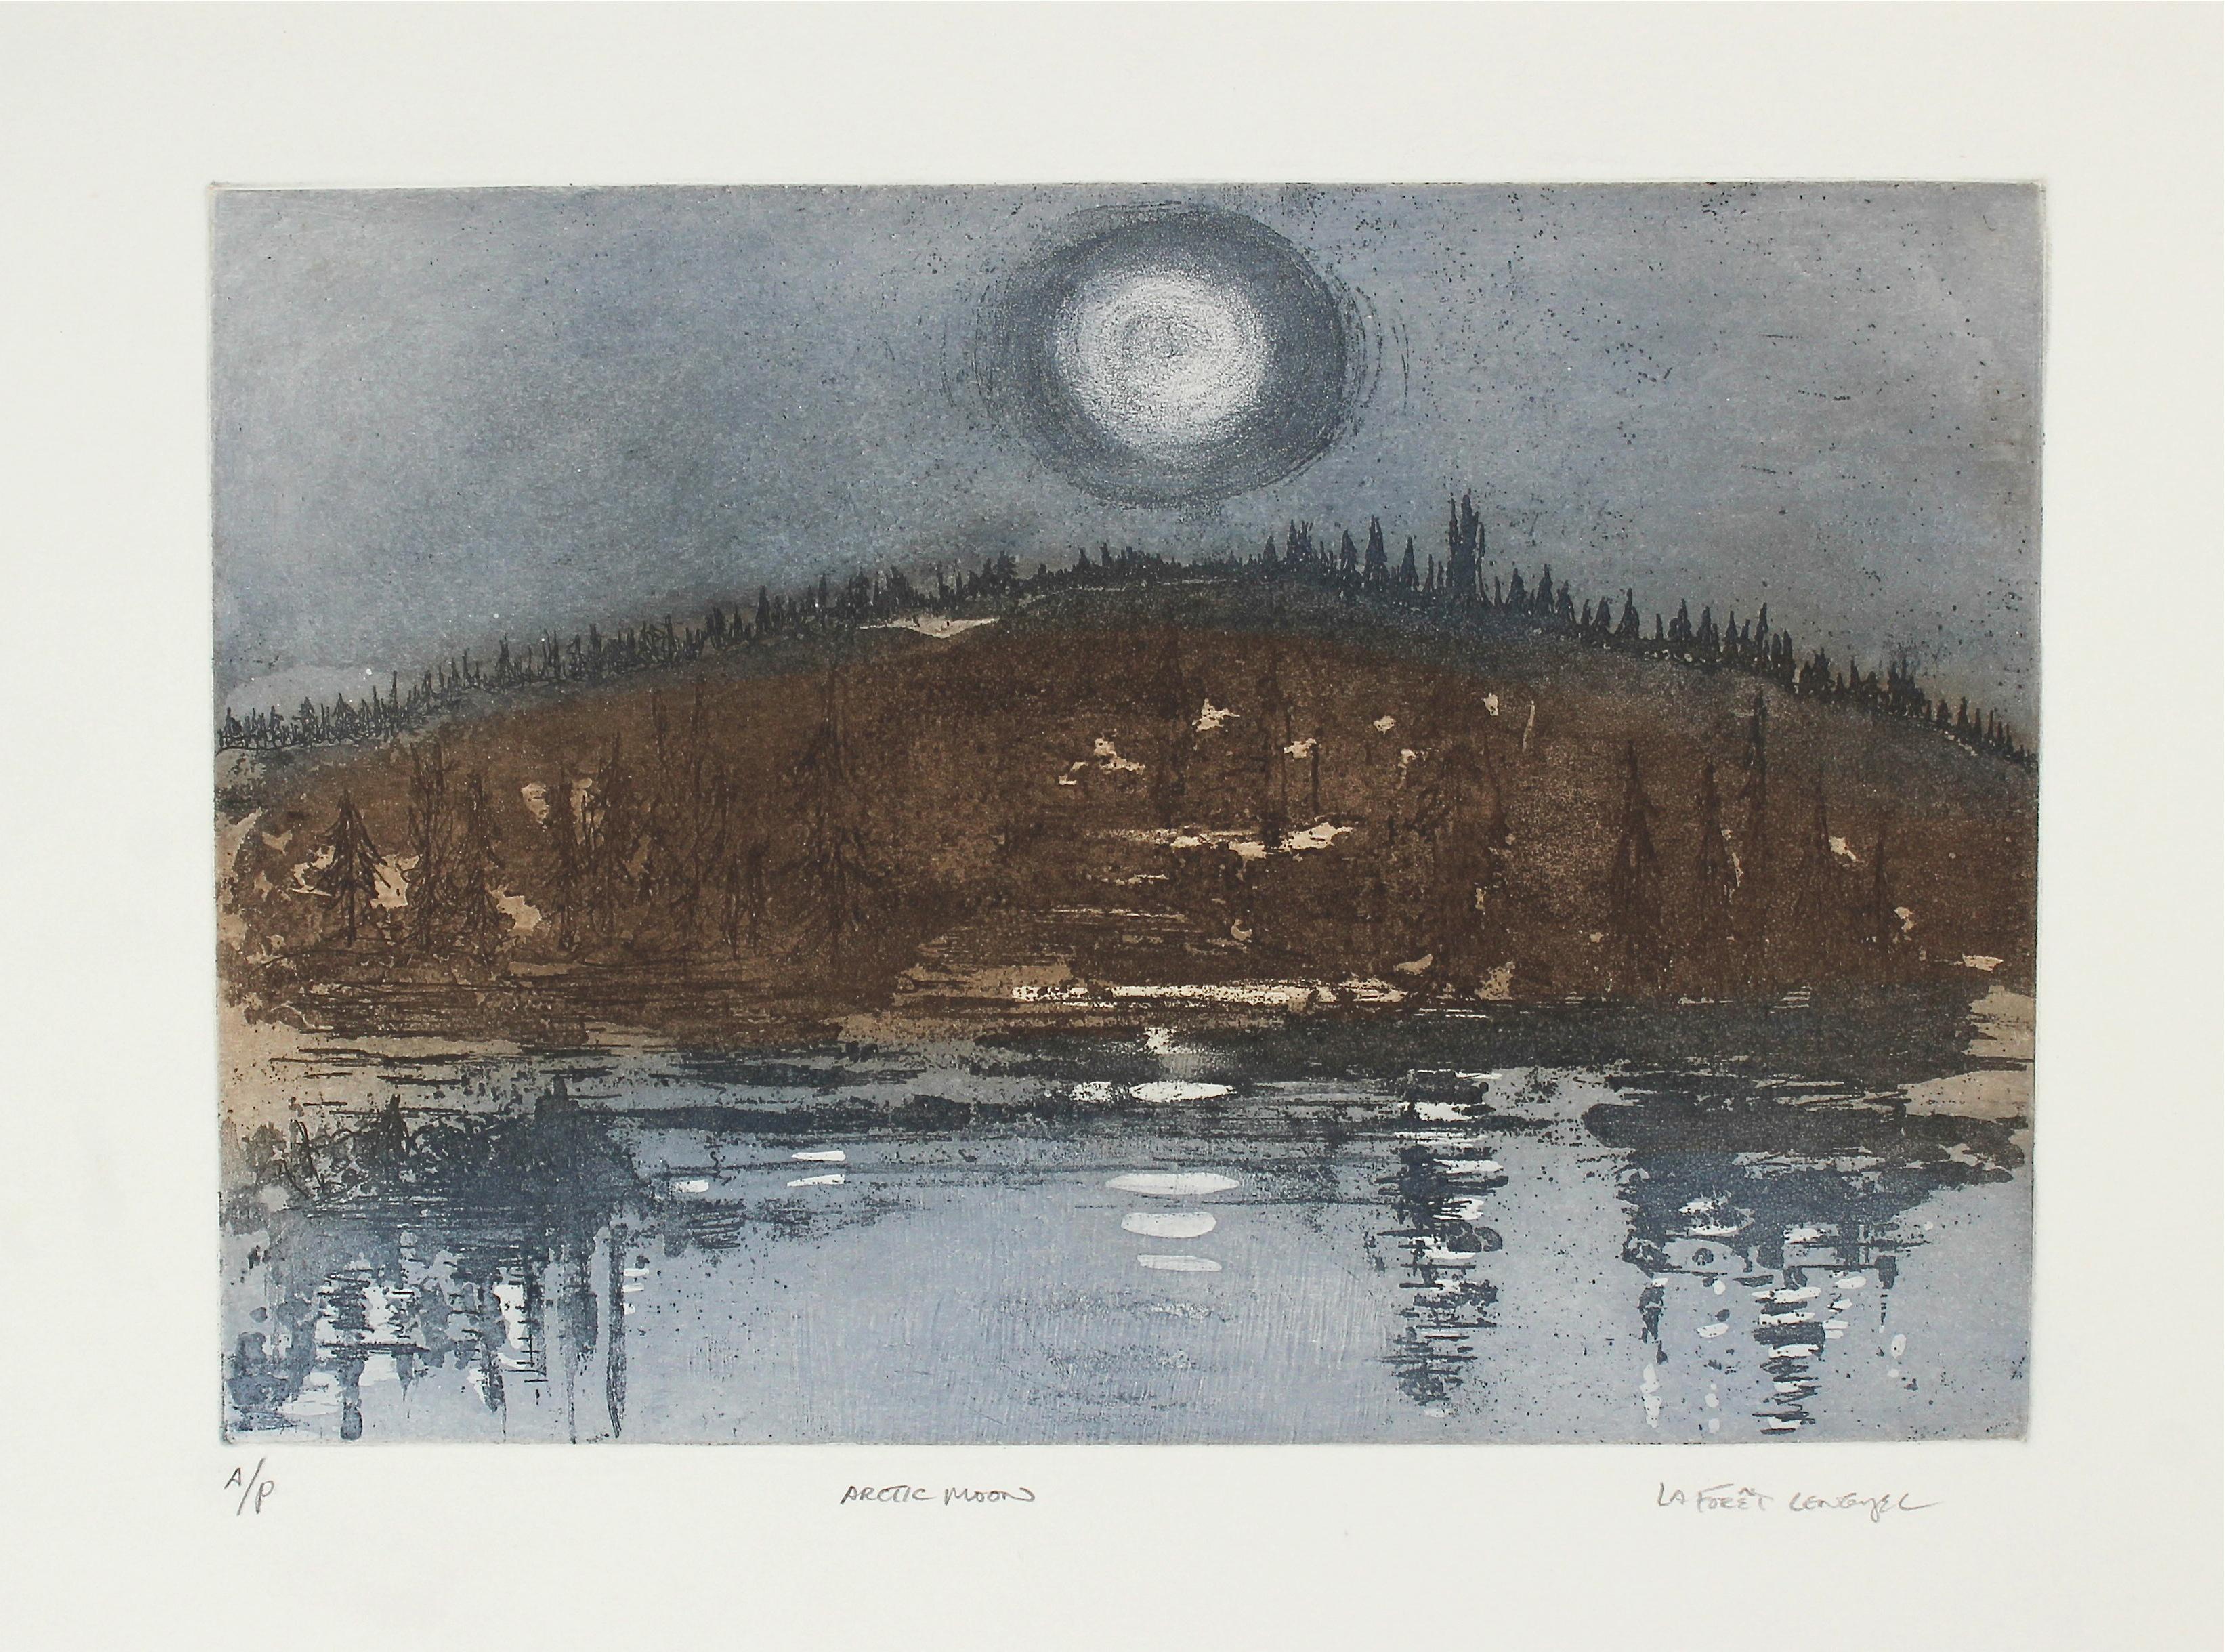 Laura Lengyel Landscape Print - "Arctic Moon" Bay Area Landscape Etching with Mountain & Water Reflections, 1981